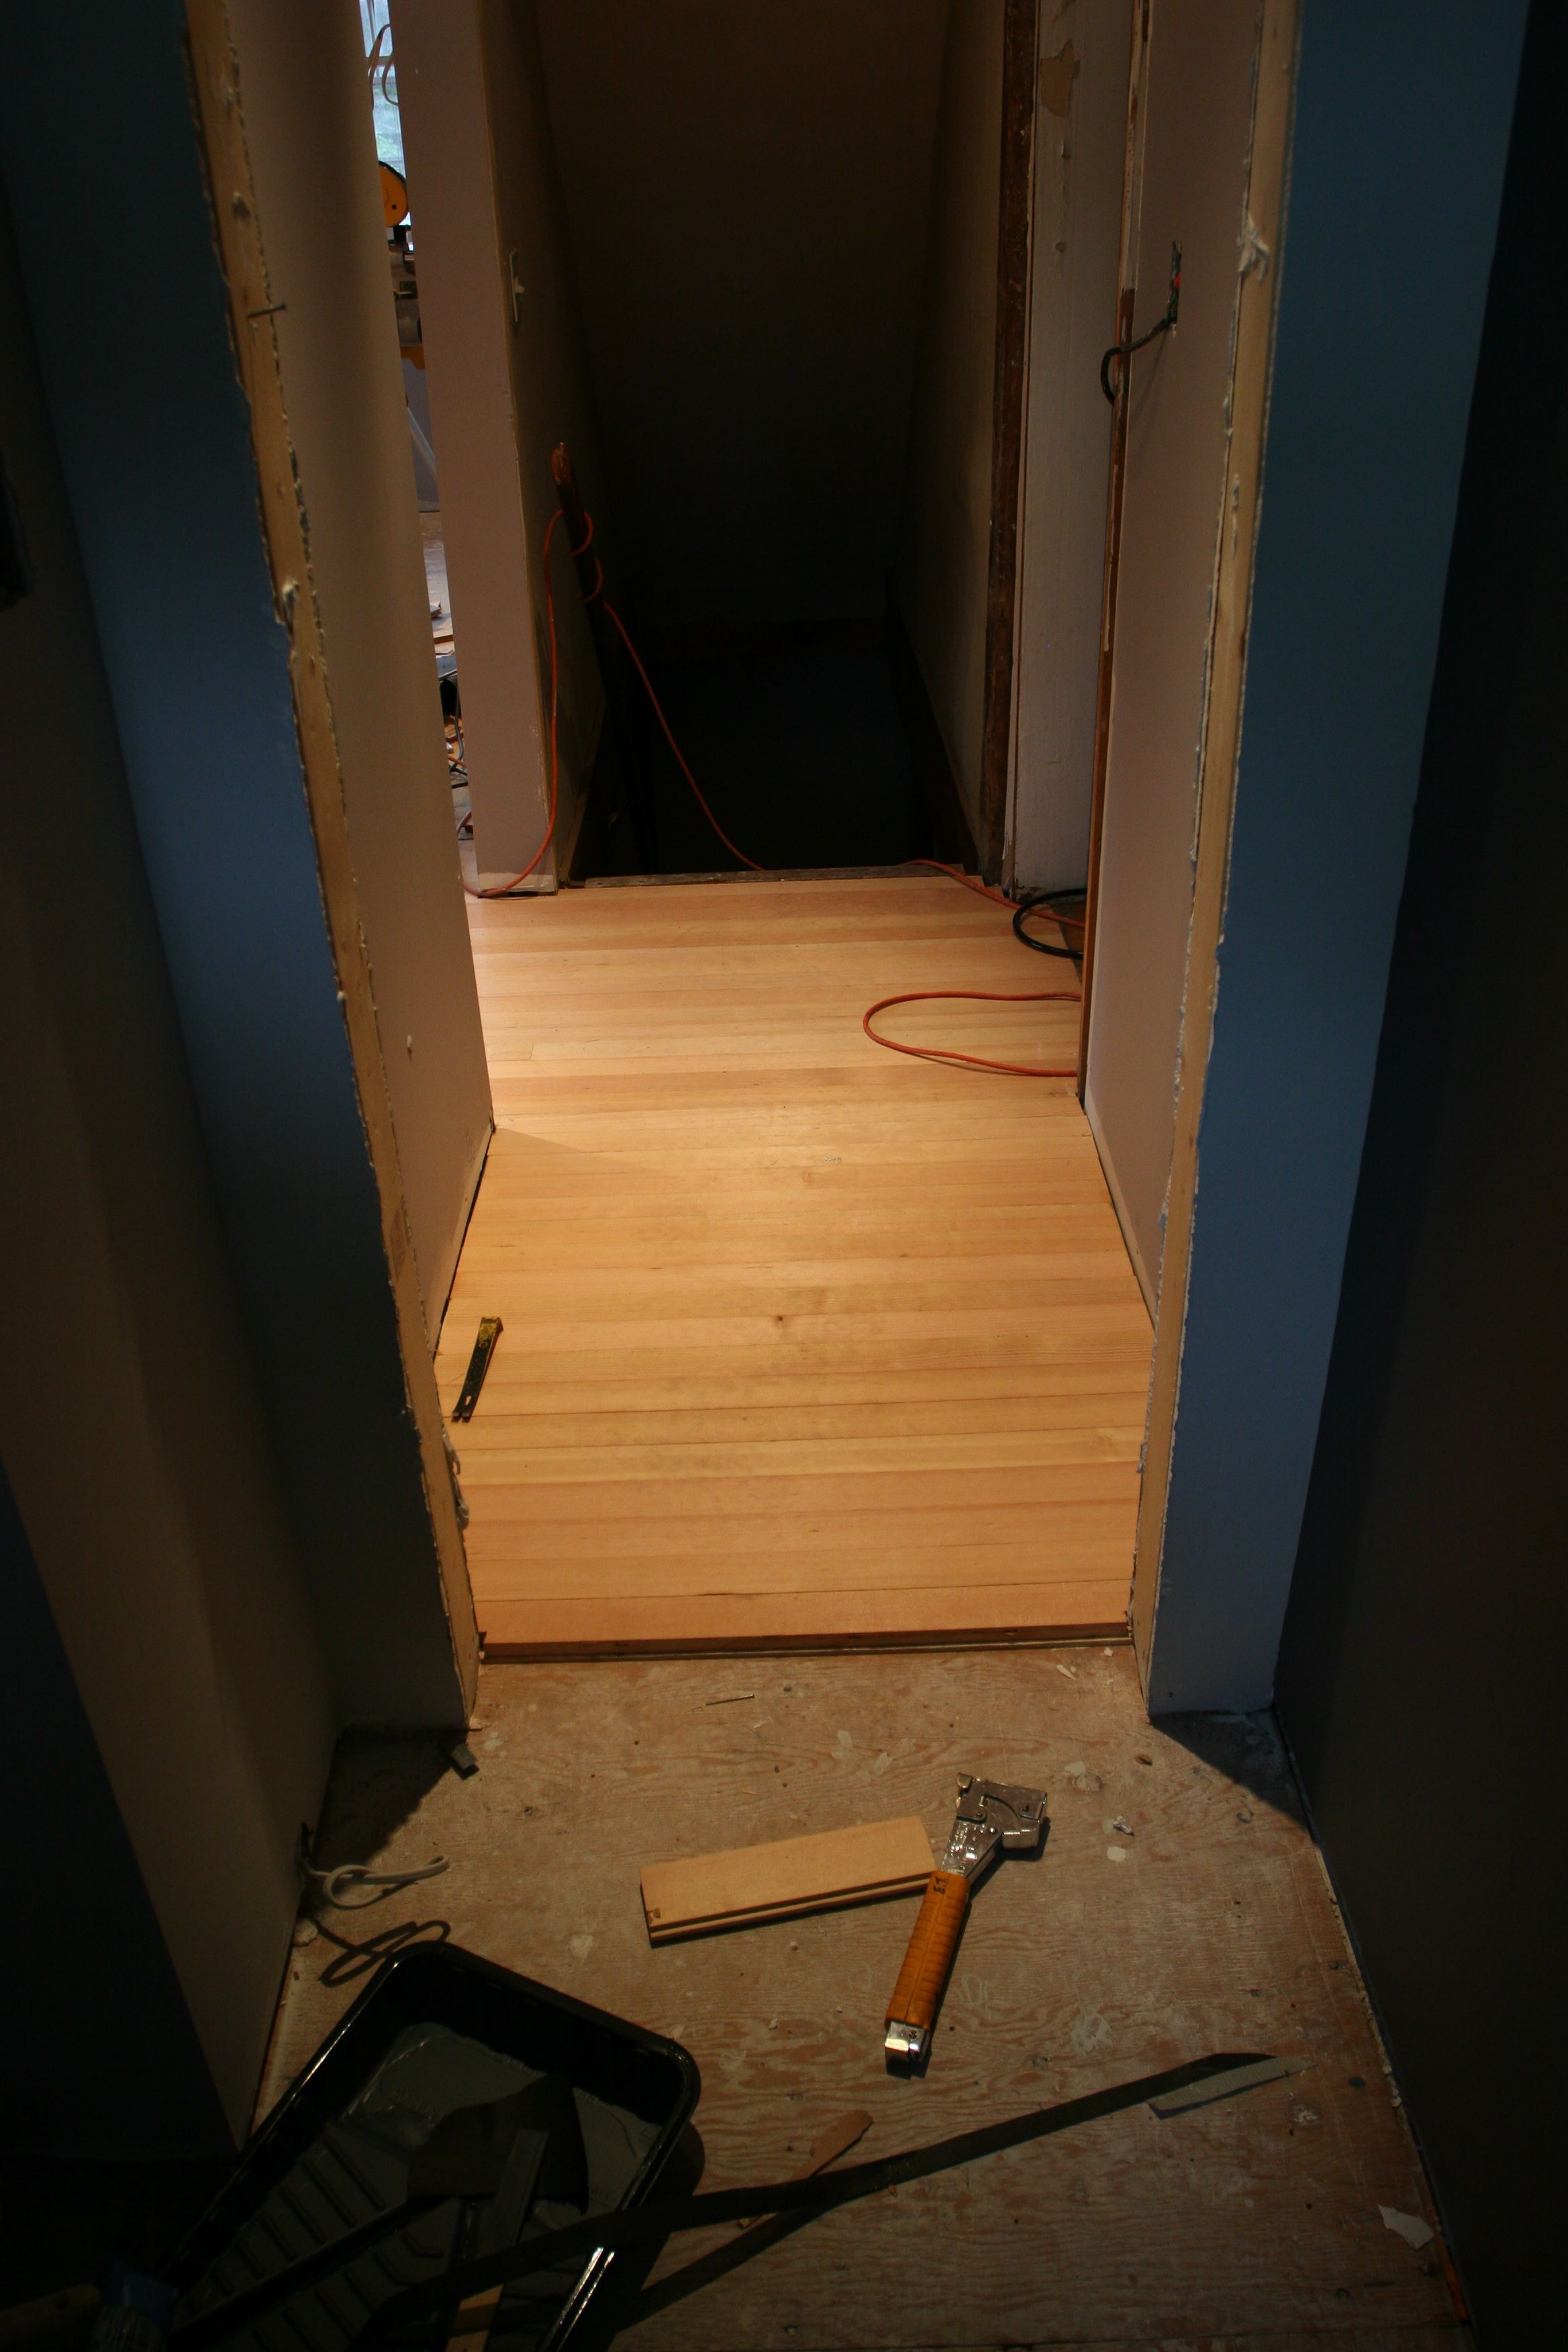 View from the powder room to the basement entrance.